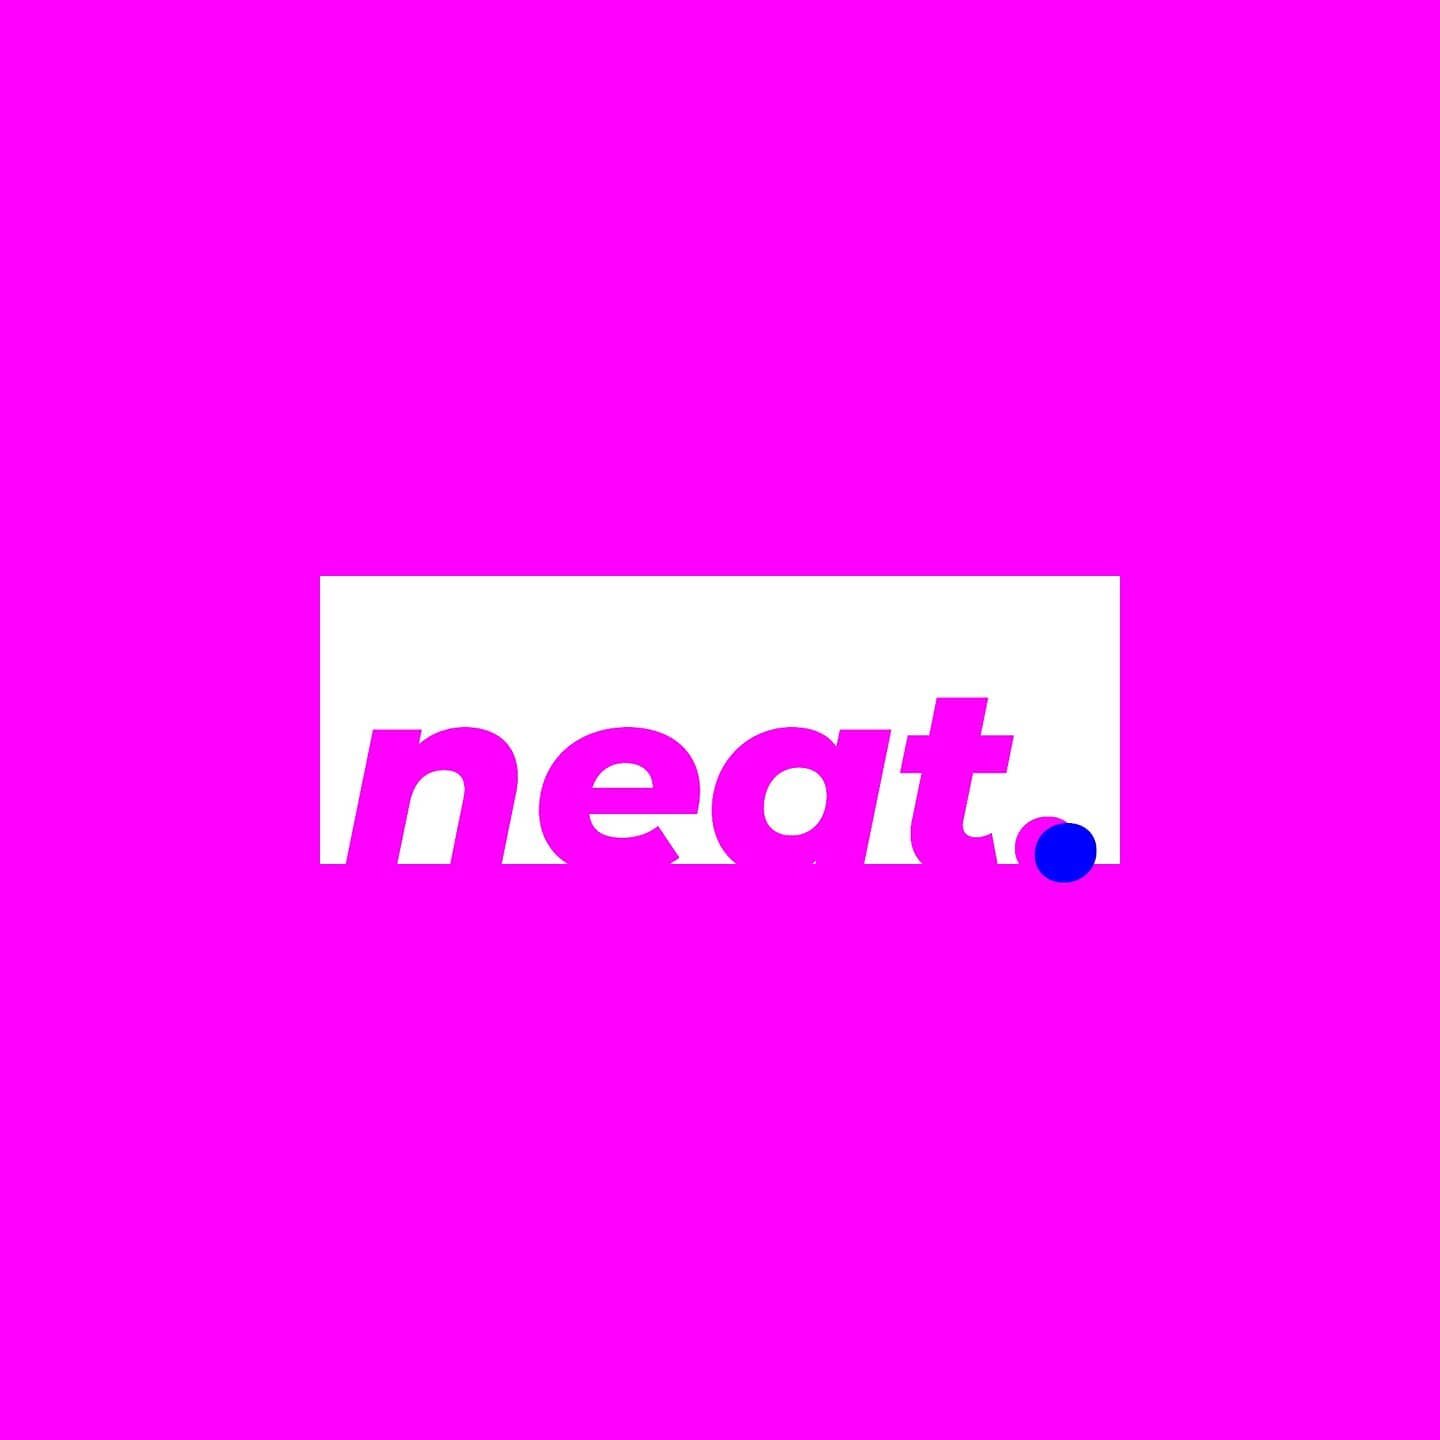 Does 'neat.' look better with the pink or white background?
...
...
#design #logo #logodesigner #supreme #graphicdesigner #90sfashion #designspiration #apparel #style #branddesign #logodesigners